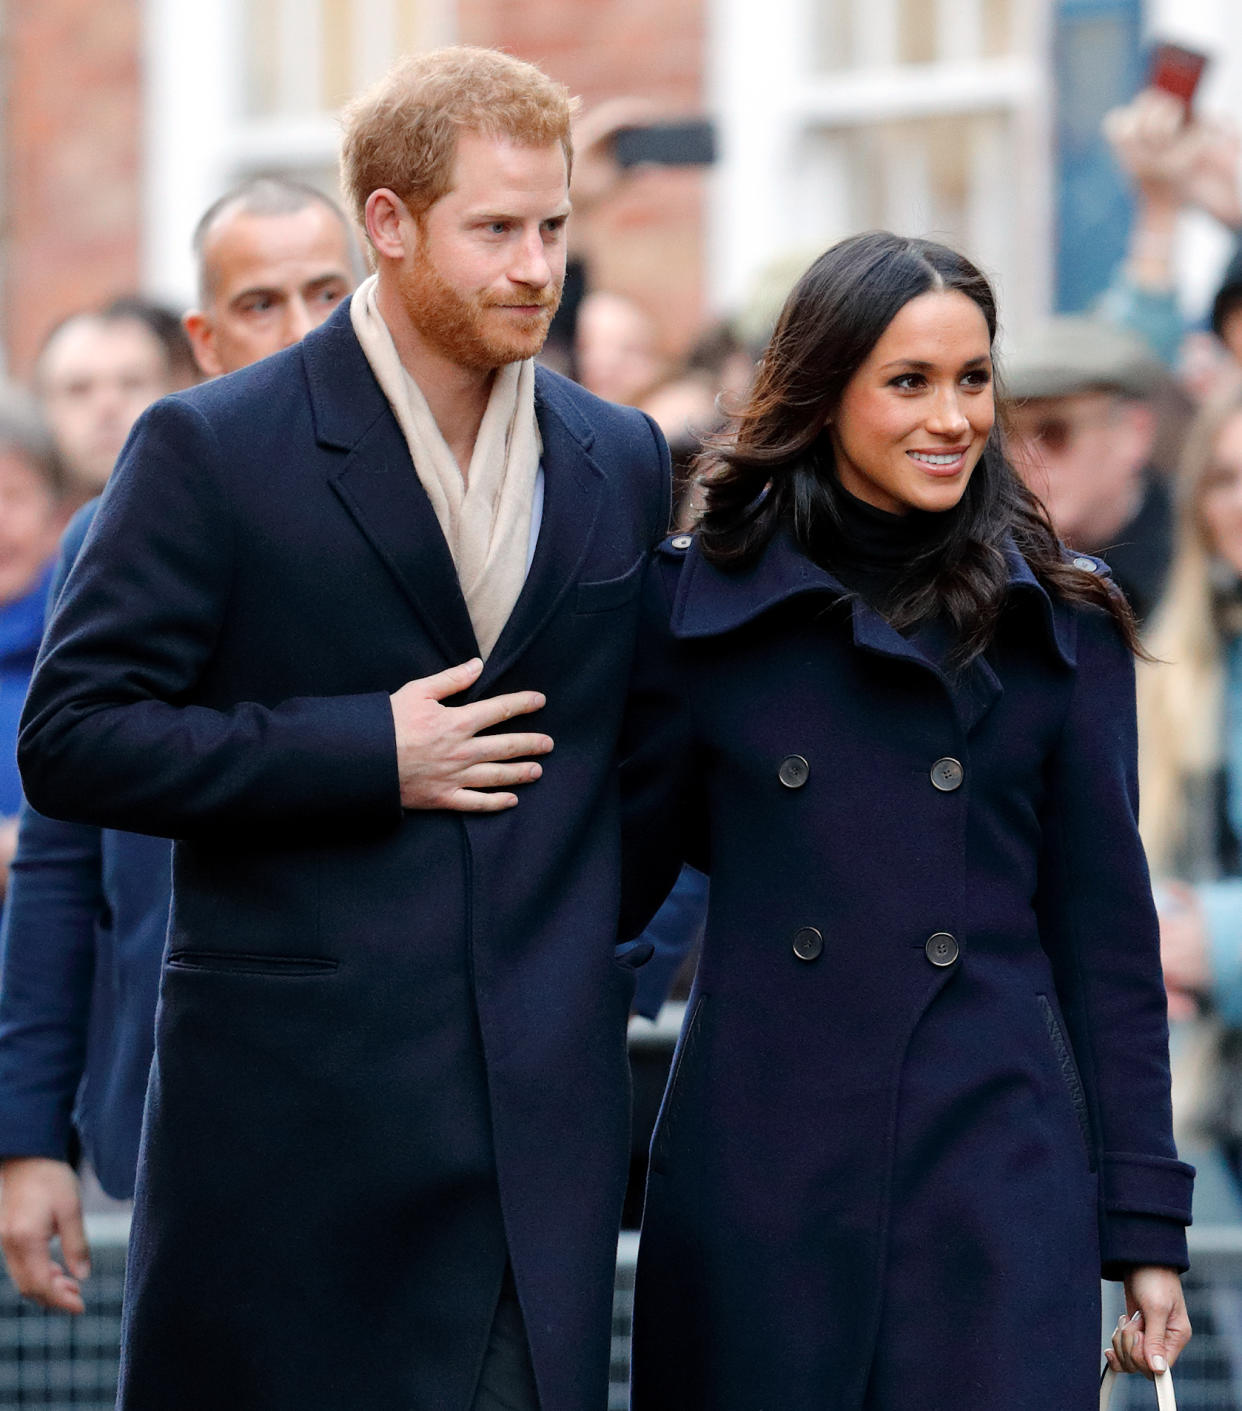 Meghan Markle is expected to join the royal family for Christmas [Photo: Getty]